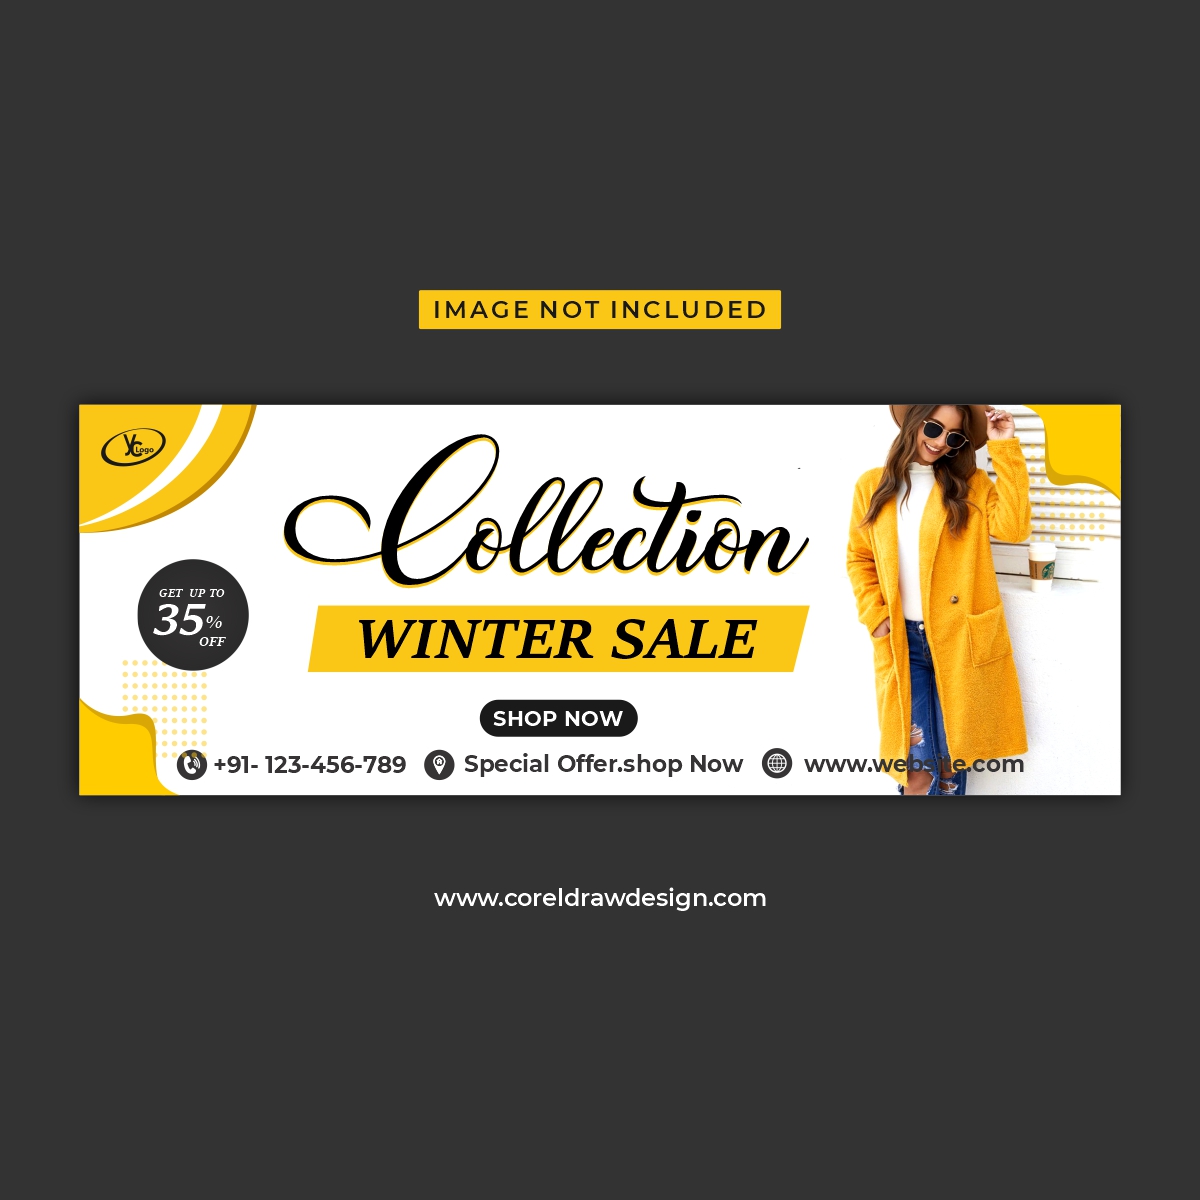 Download Winter Banner Fashion Free Vector Design | CorelDraw Design  (Download Free CDR, Vector, Stock Images, Tutorials, Tips & Tricks)